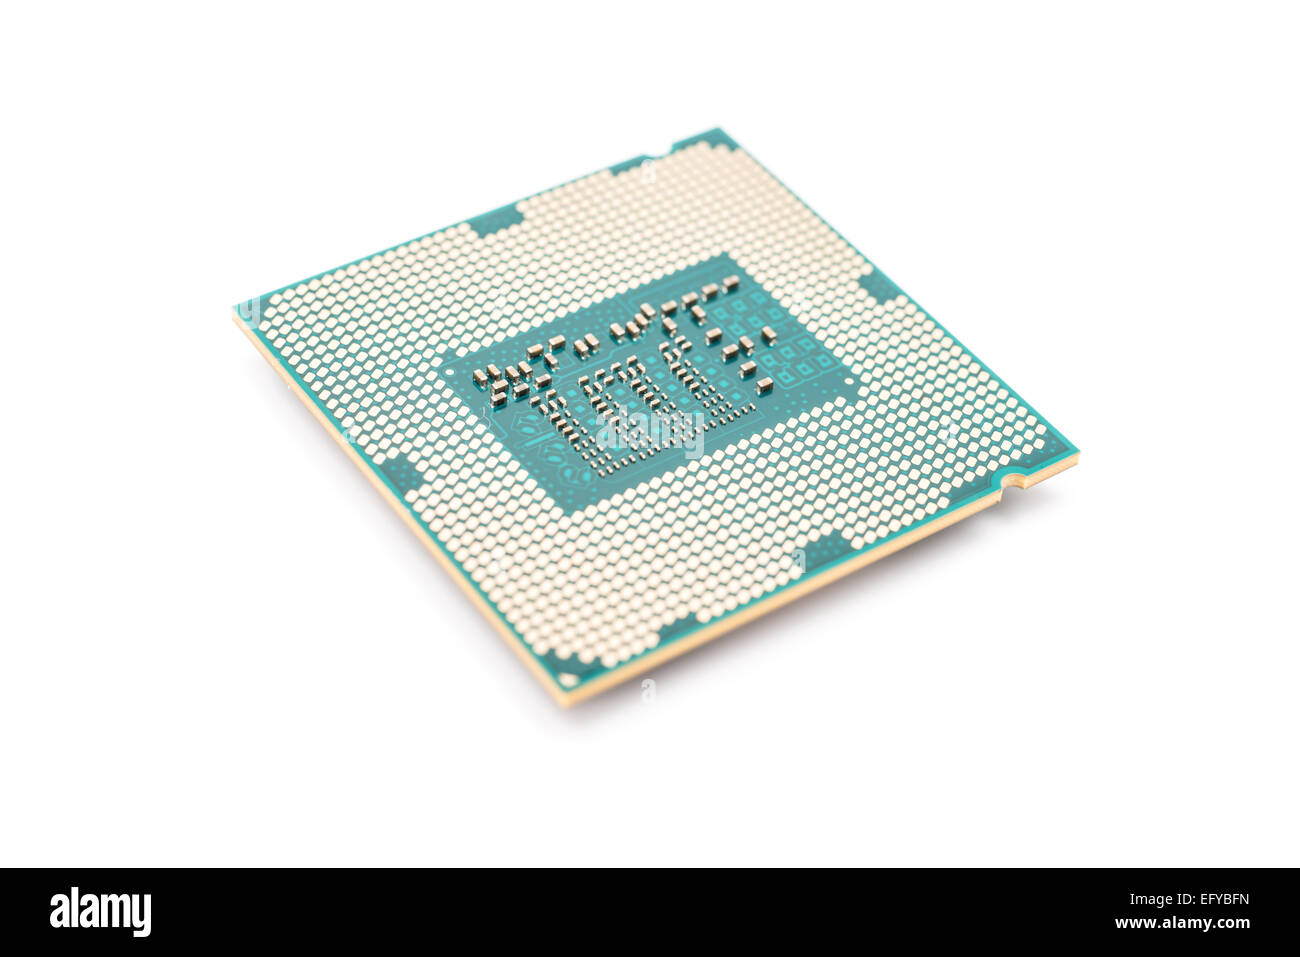 Ordinateur CPU (Central Processing Unit) Chip Isolated On White Banque D'Images